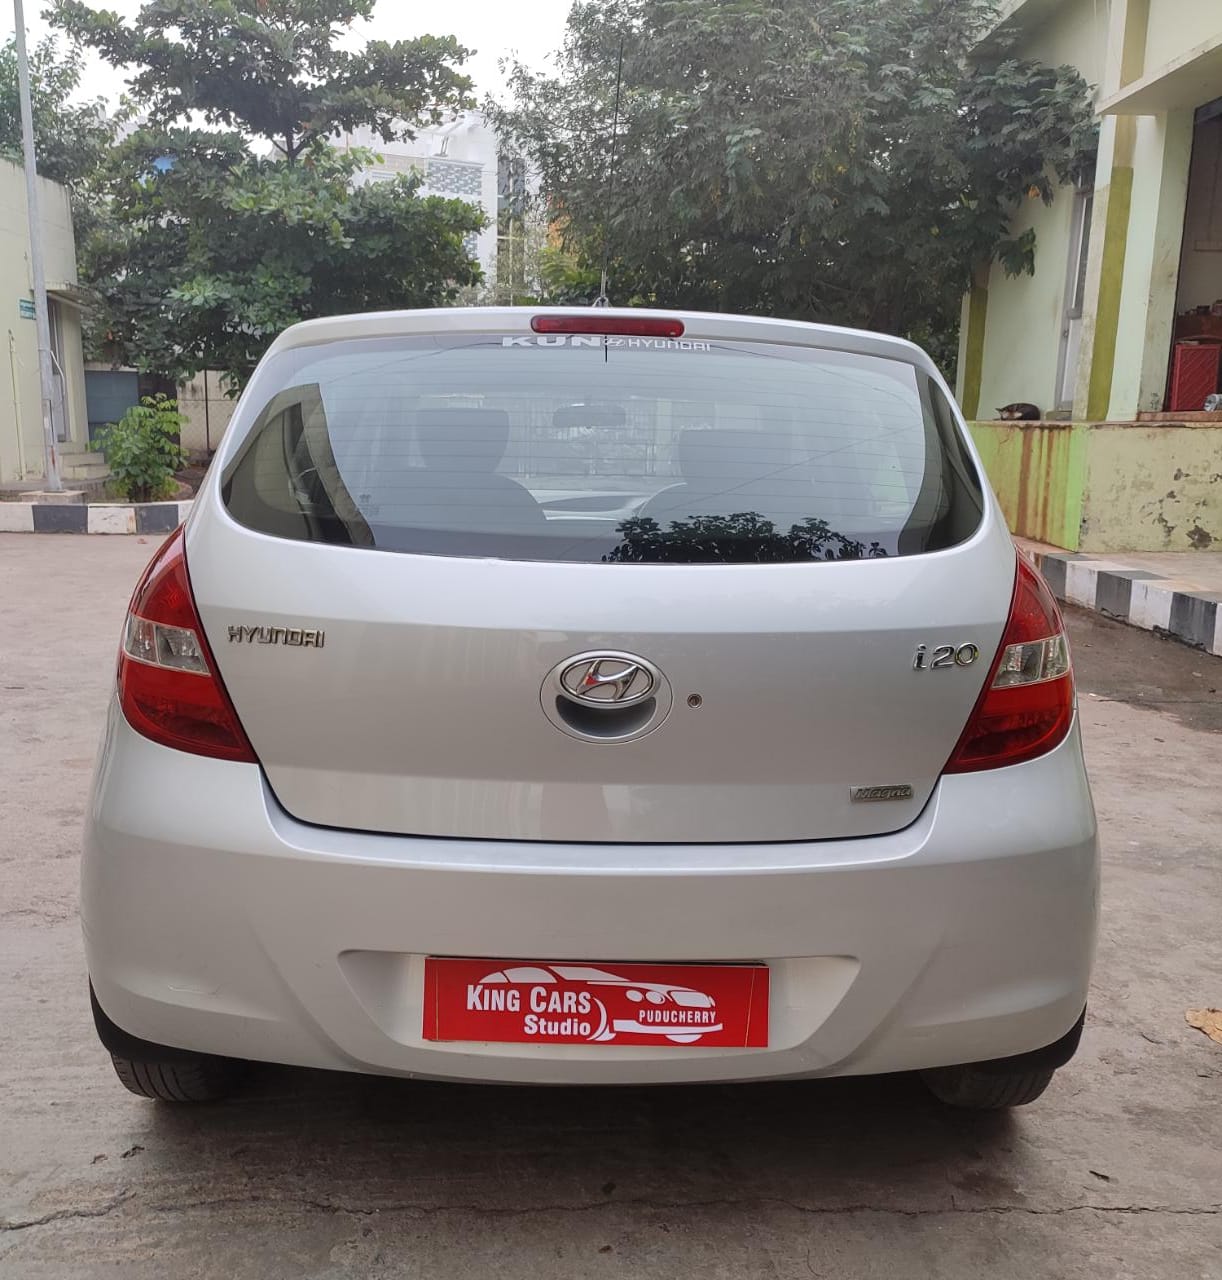 5423-for-sale-Hyundai-i20-Petrol-First-Owner-2010-PY-registered-rs-284999